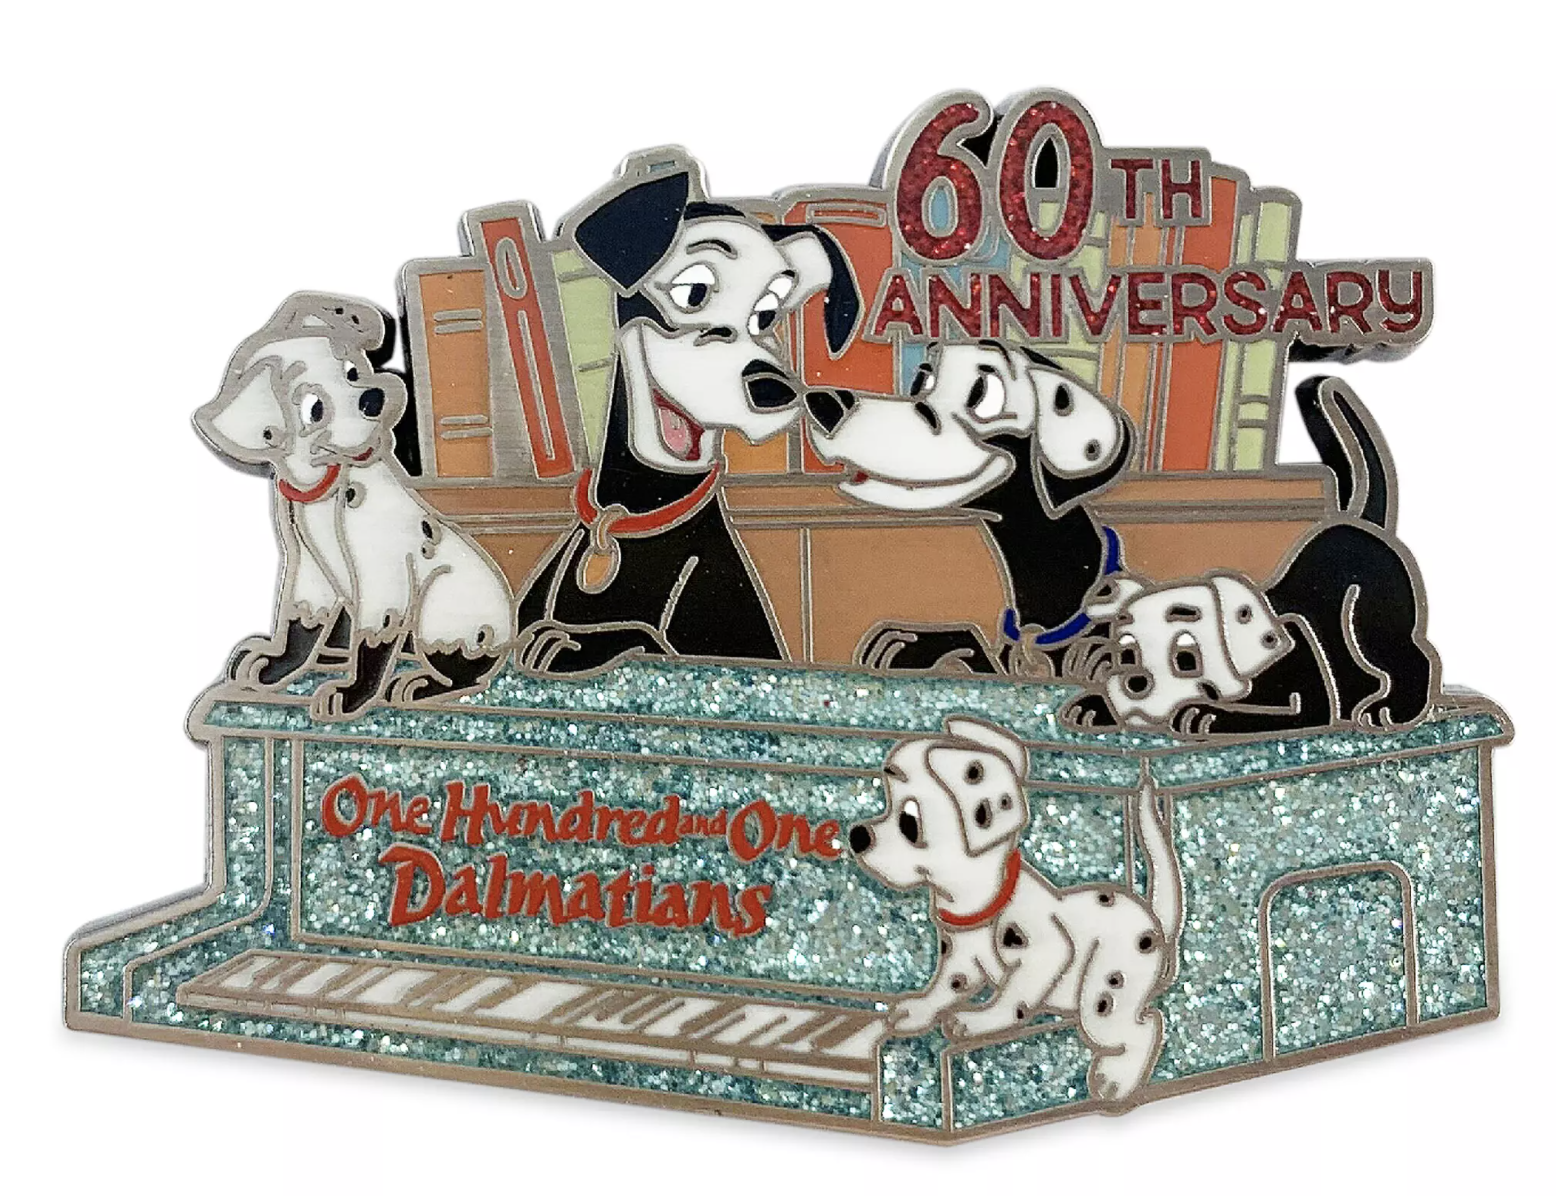 One Hundred and One Dalmatians (film) - D23